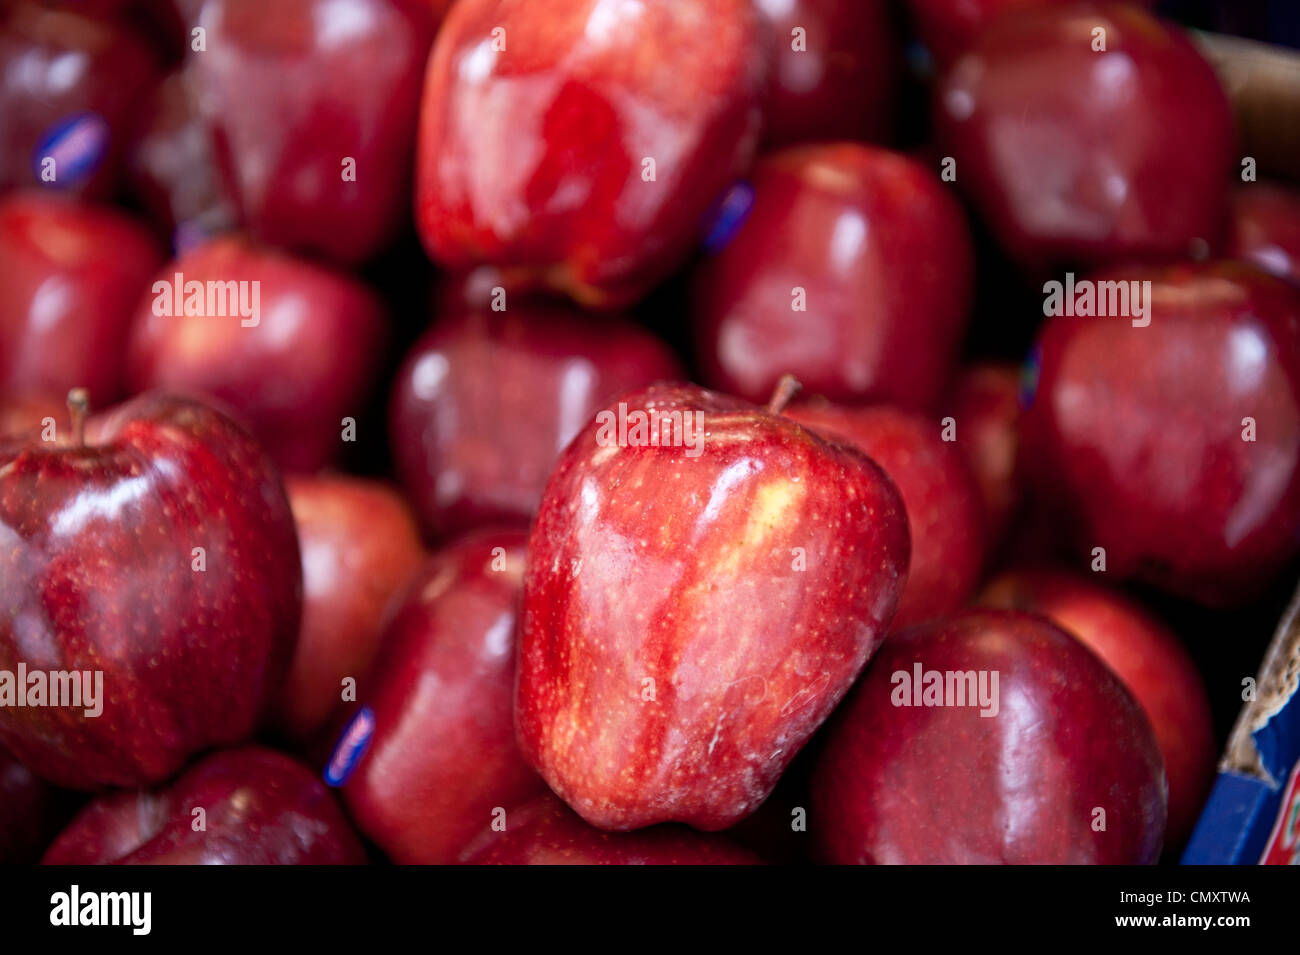 A bright shot of bright, organic red apples in a food market. Stock Photo